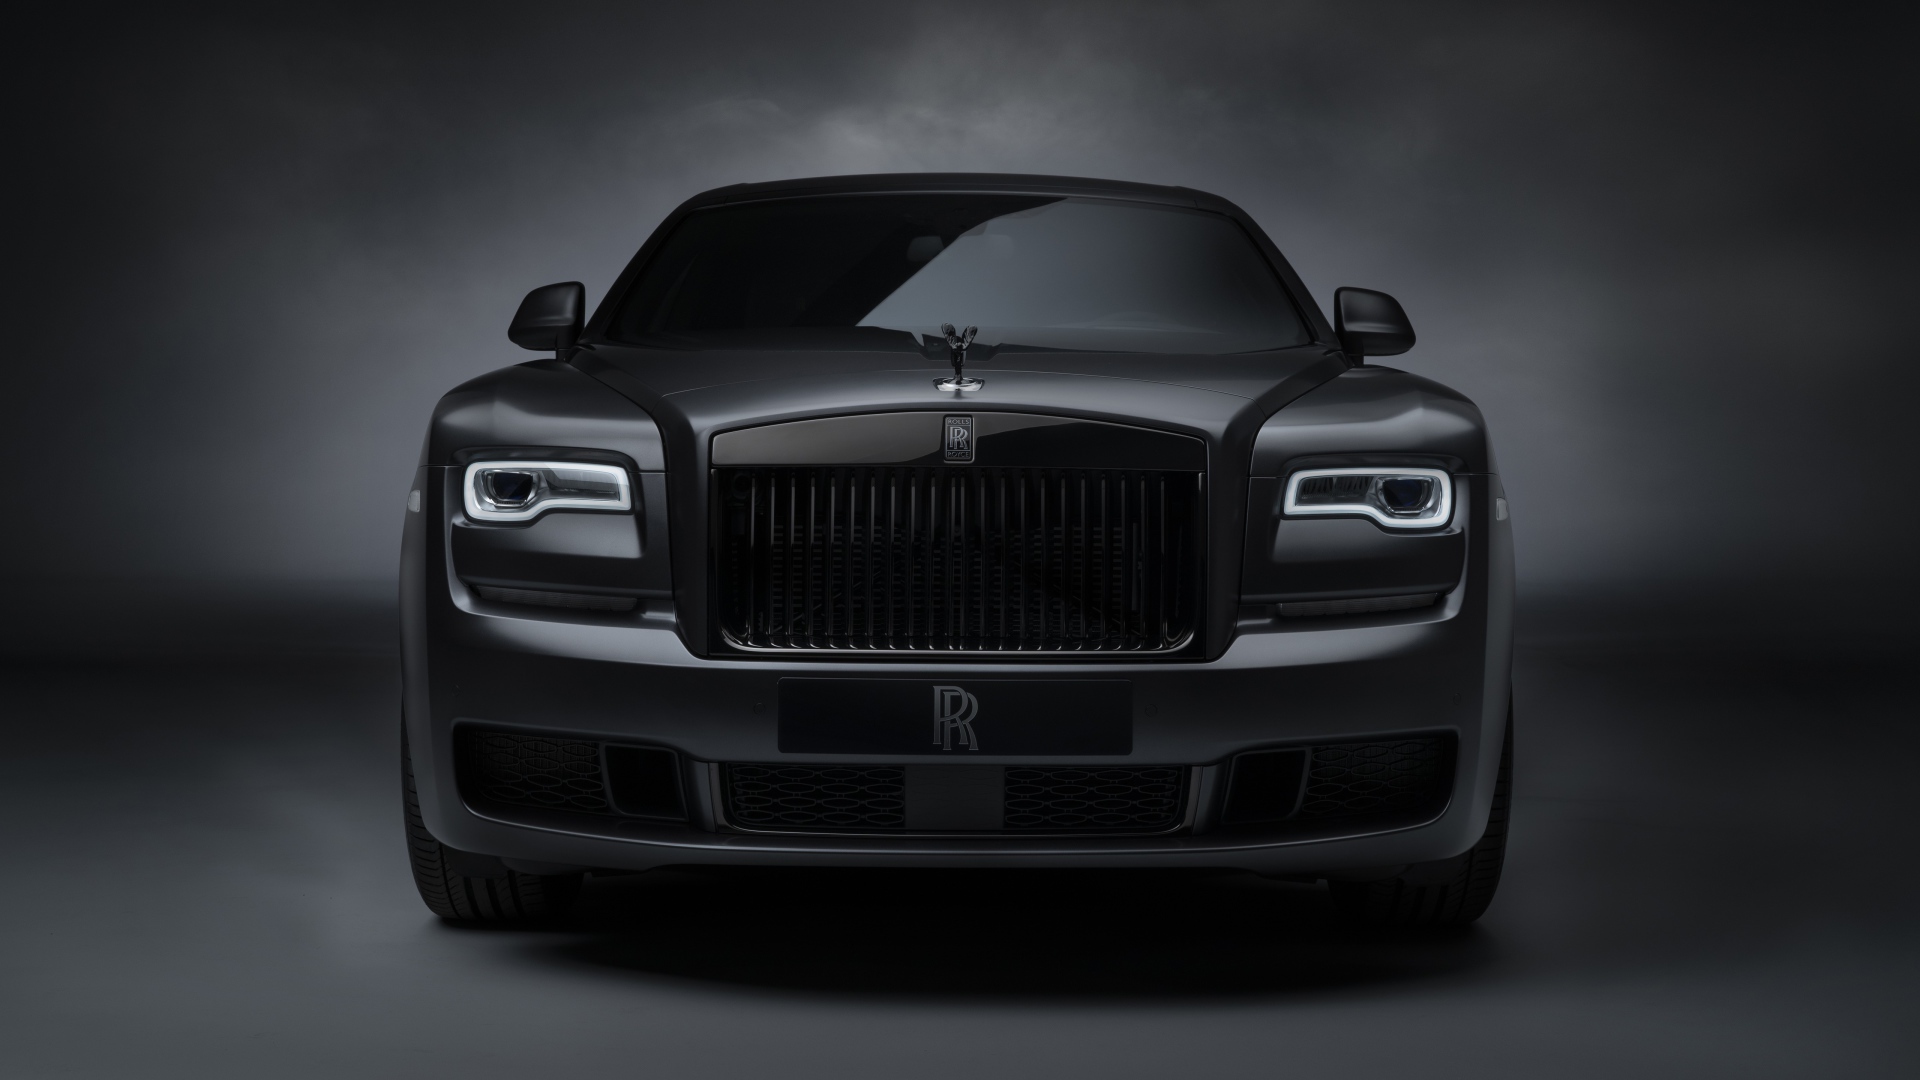 2019 Rolls-Royce Ghost car front view